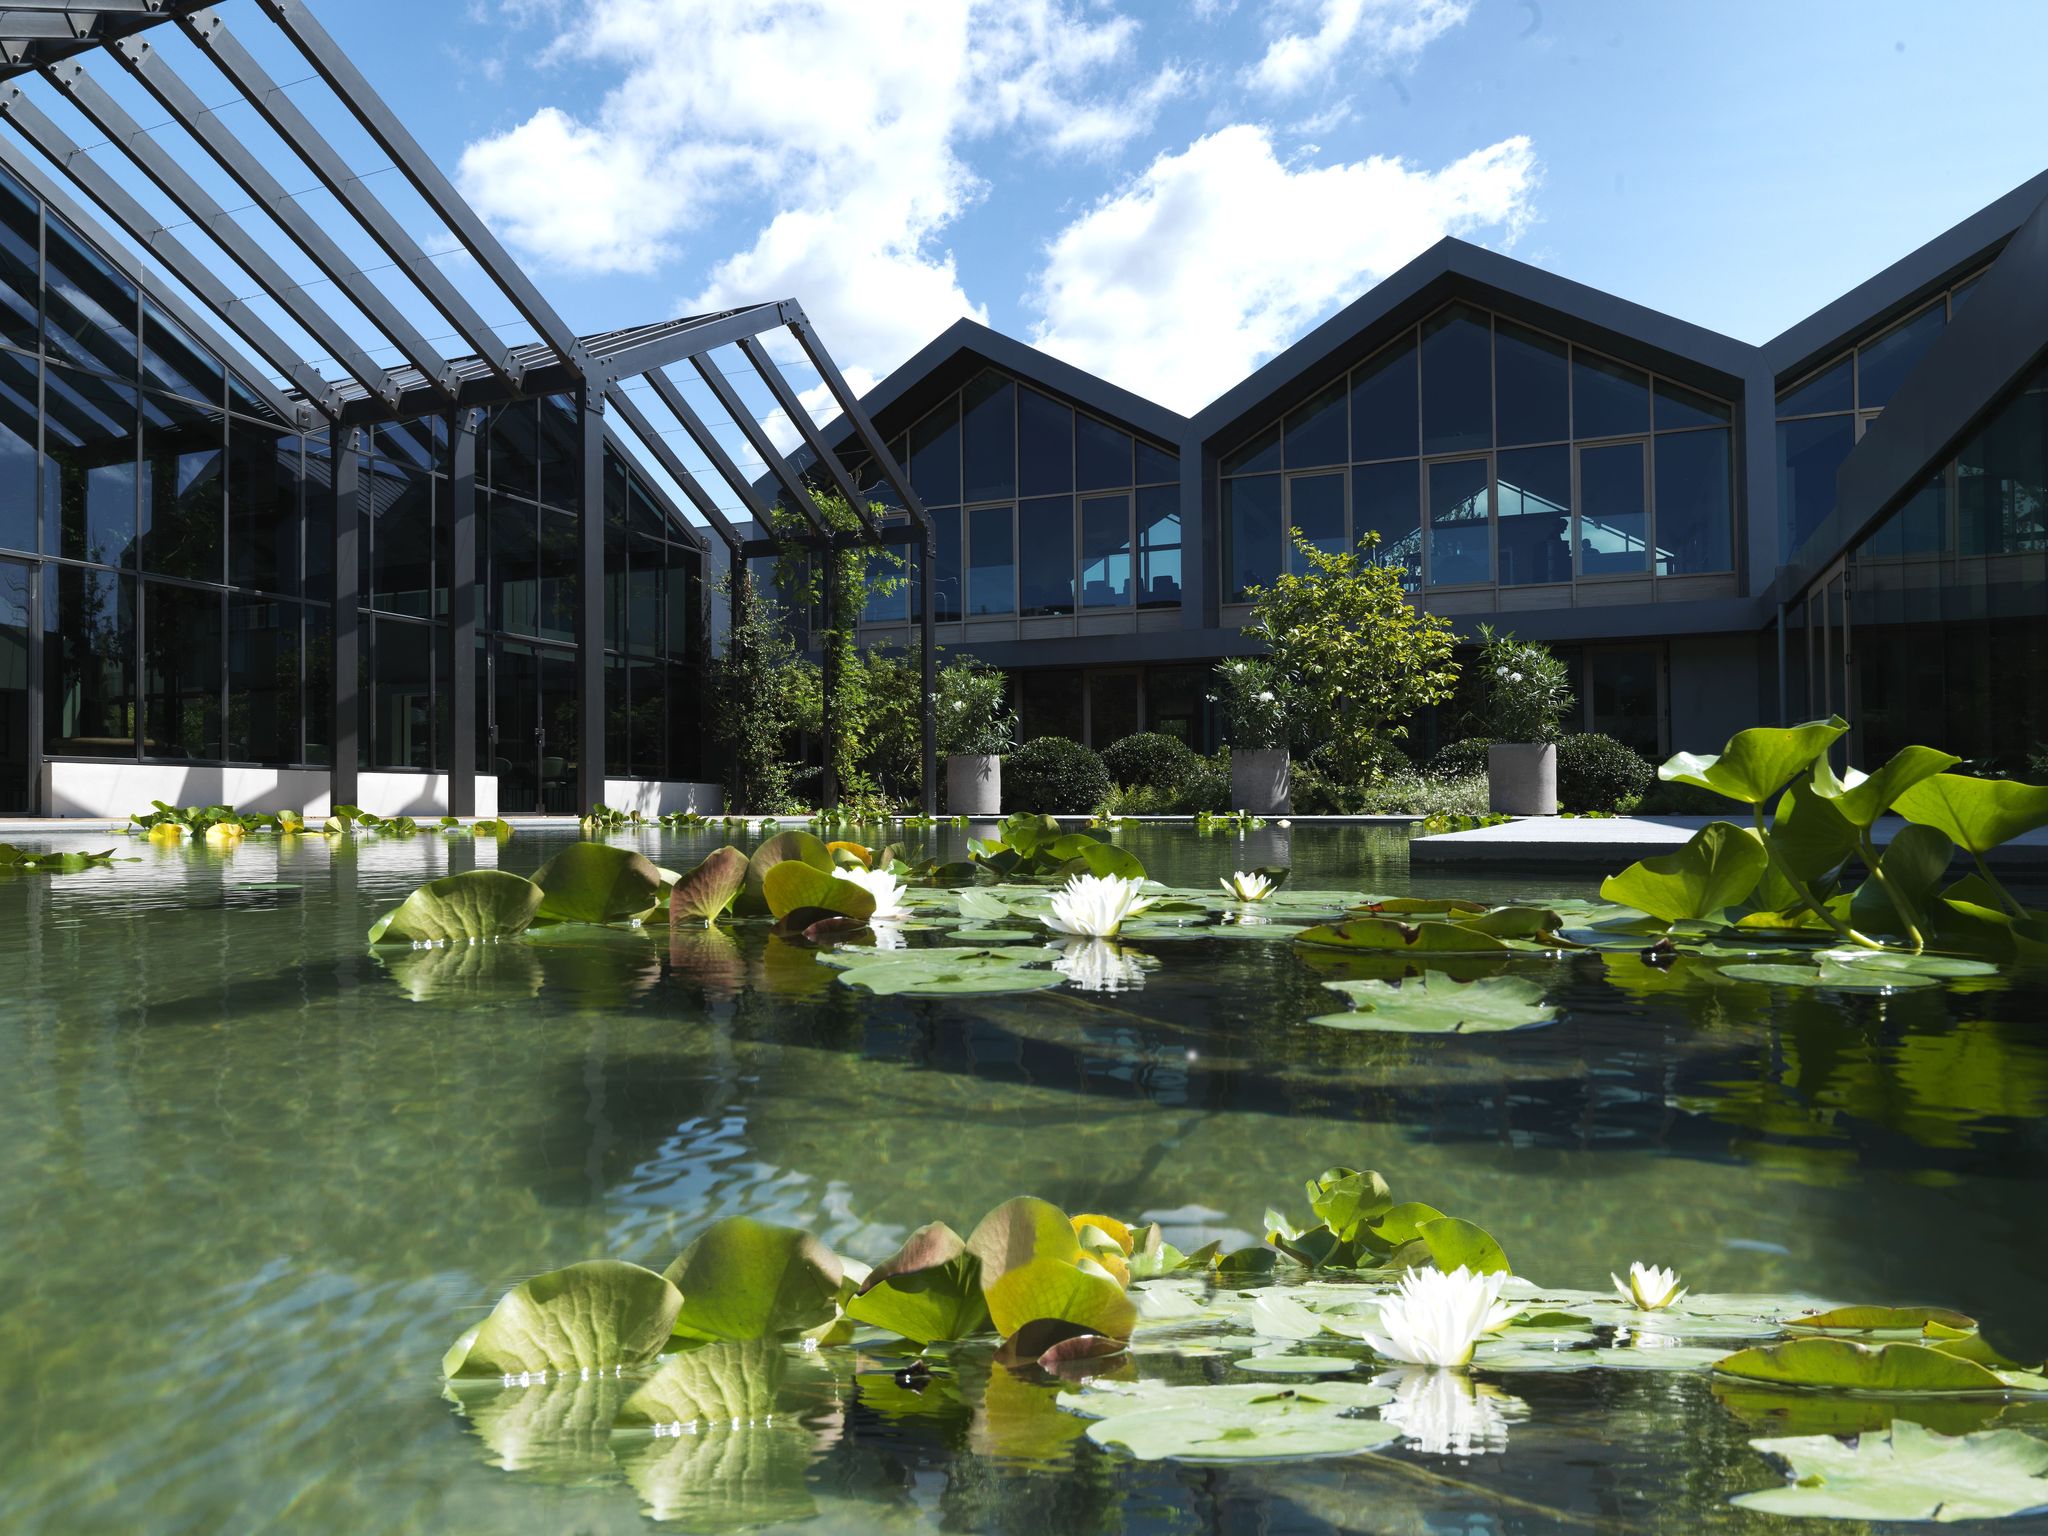 Water, Vegetation, Pond, Botany, Aquatic plant, Architecture, Botanical garden, water lily, Biome, Reflection, 